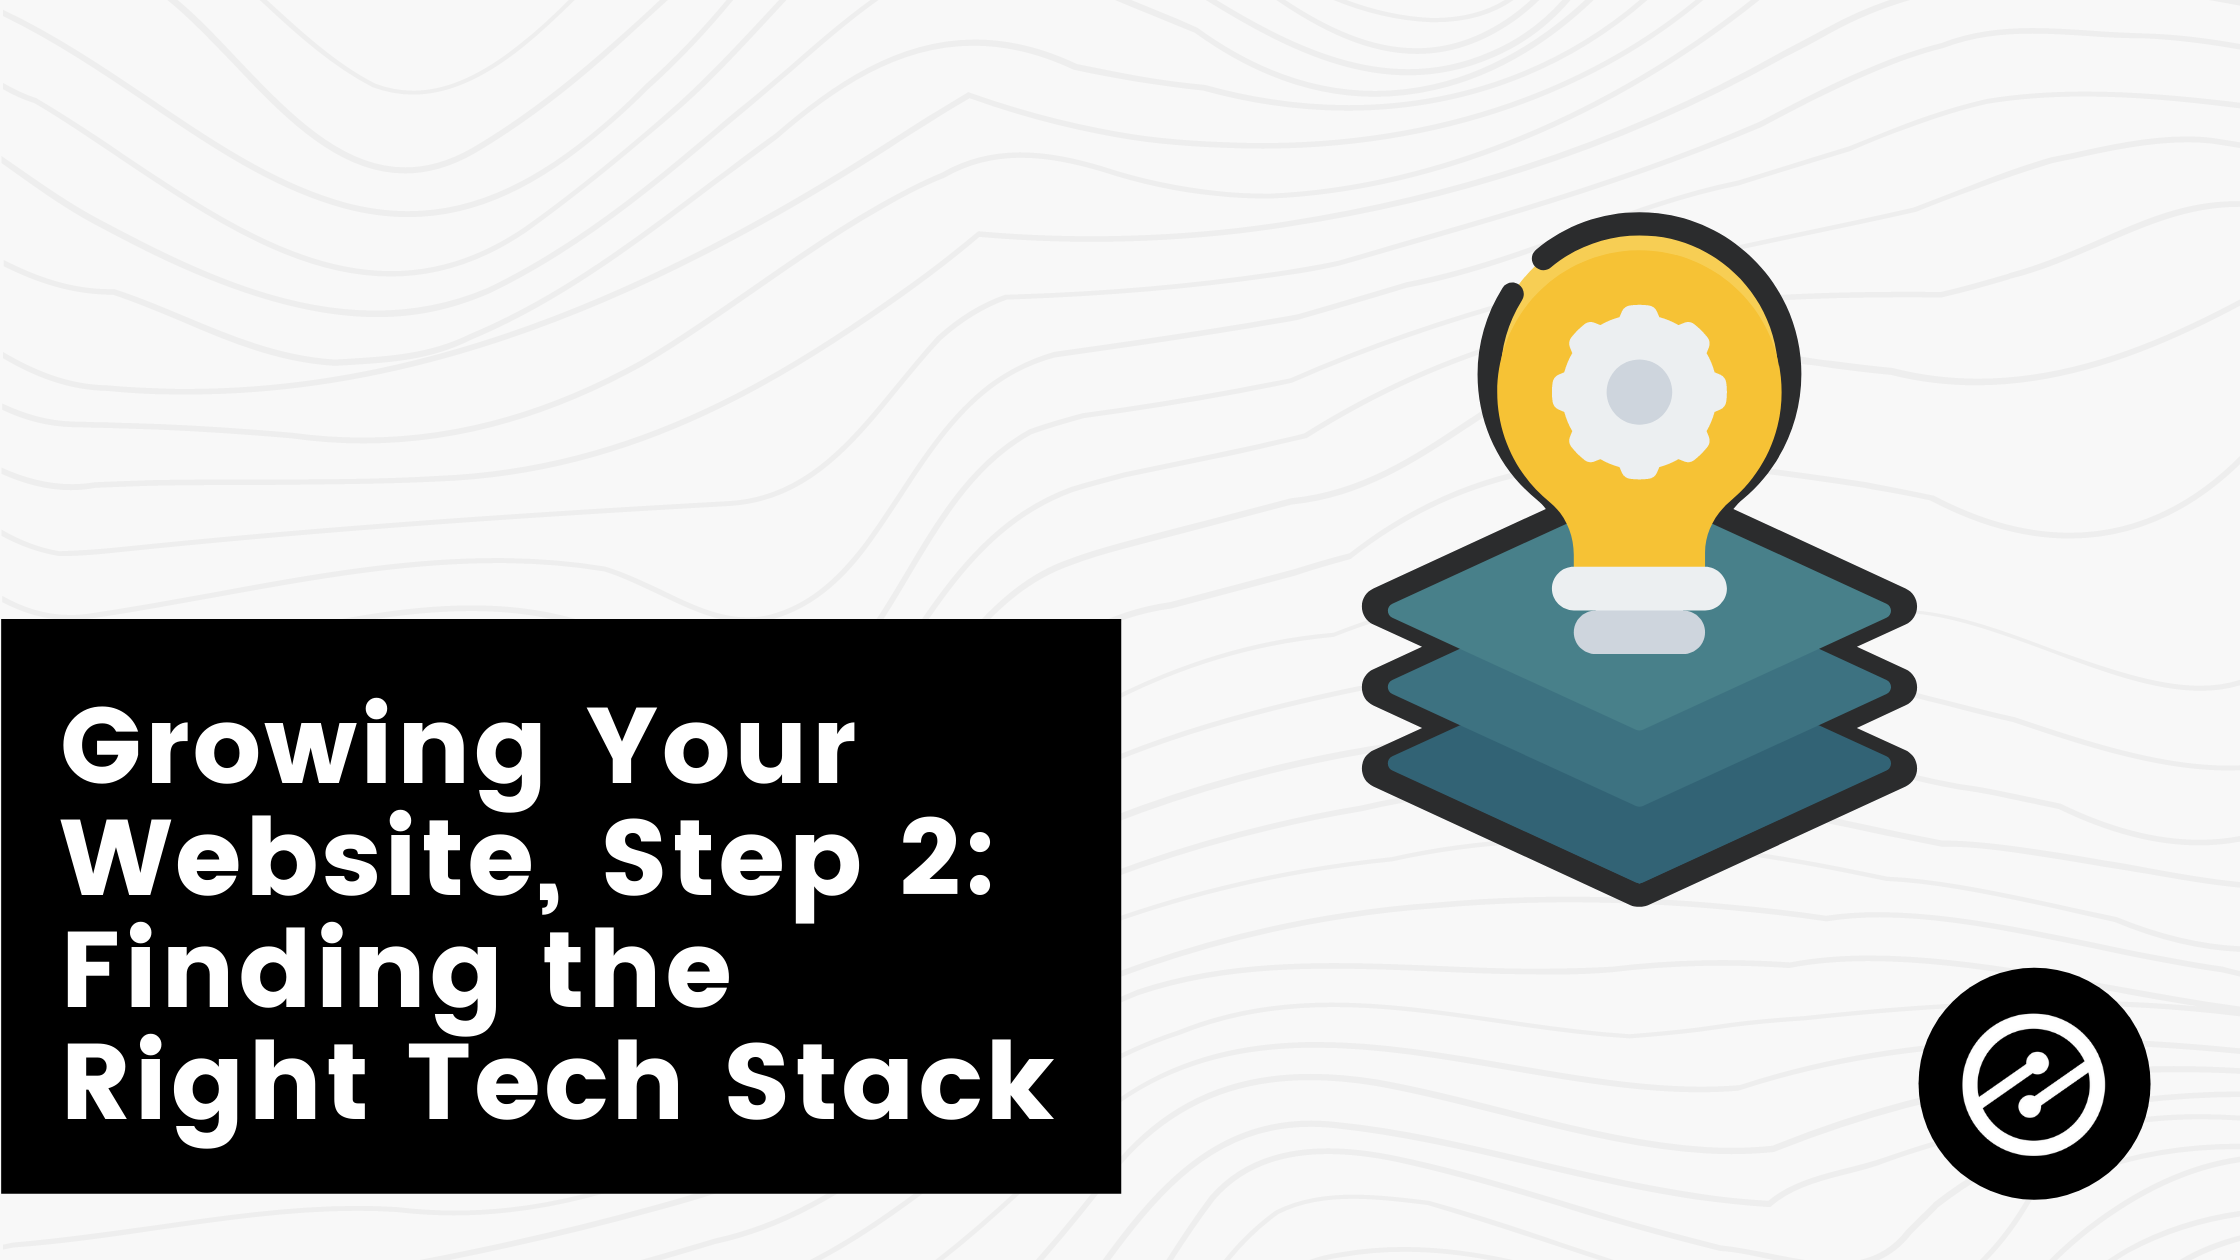 Growing Your Website, Step 2: Finding the Right Tech Stack